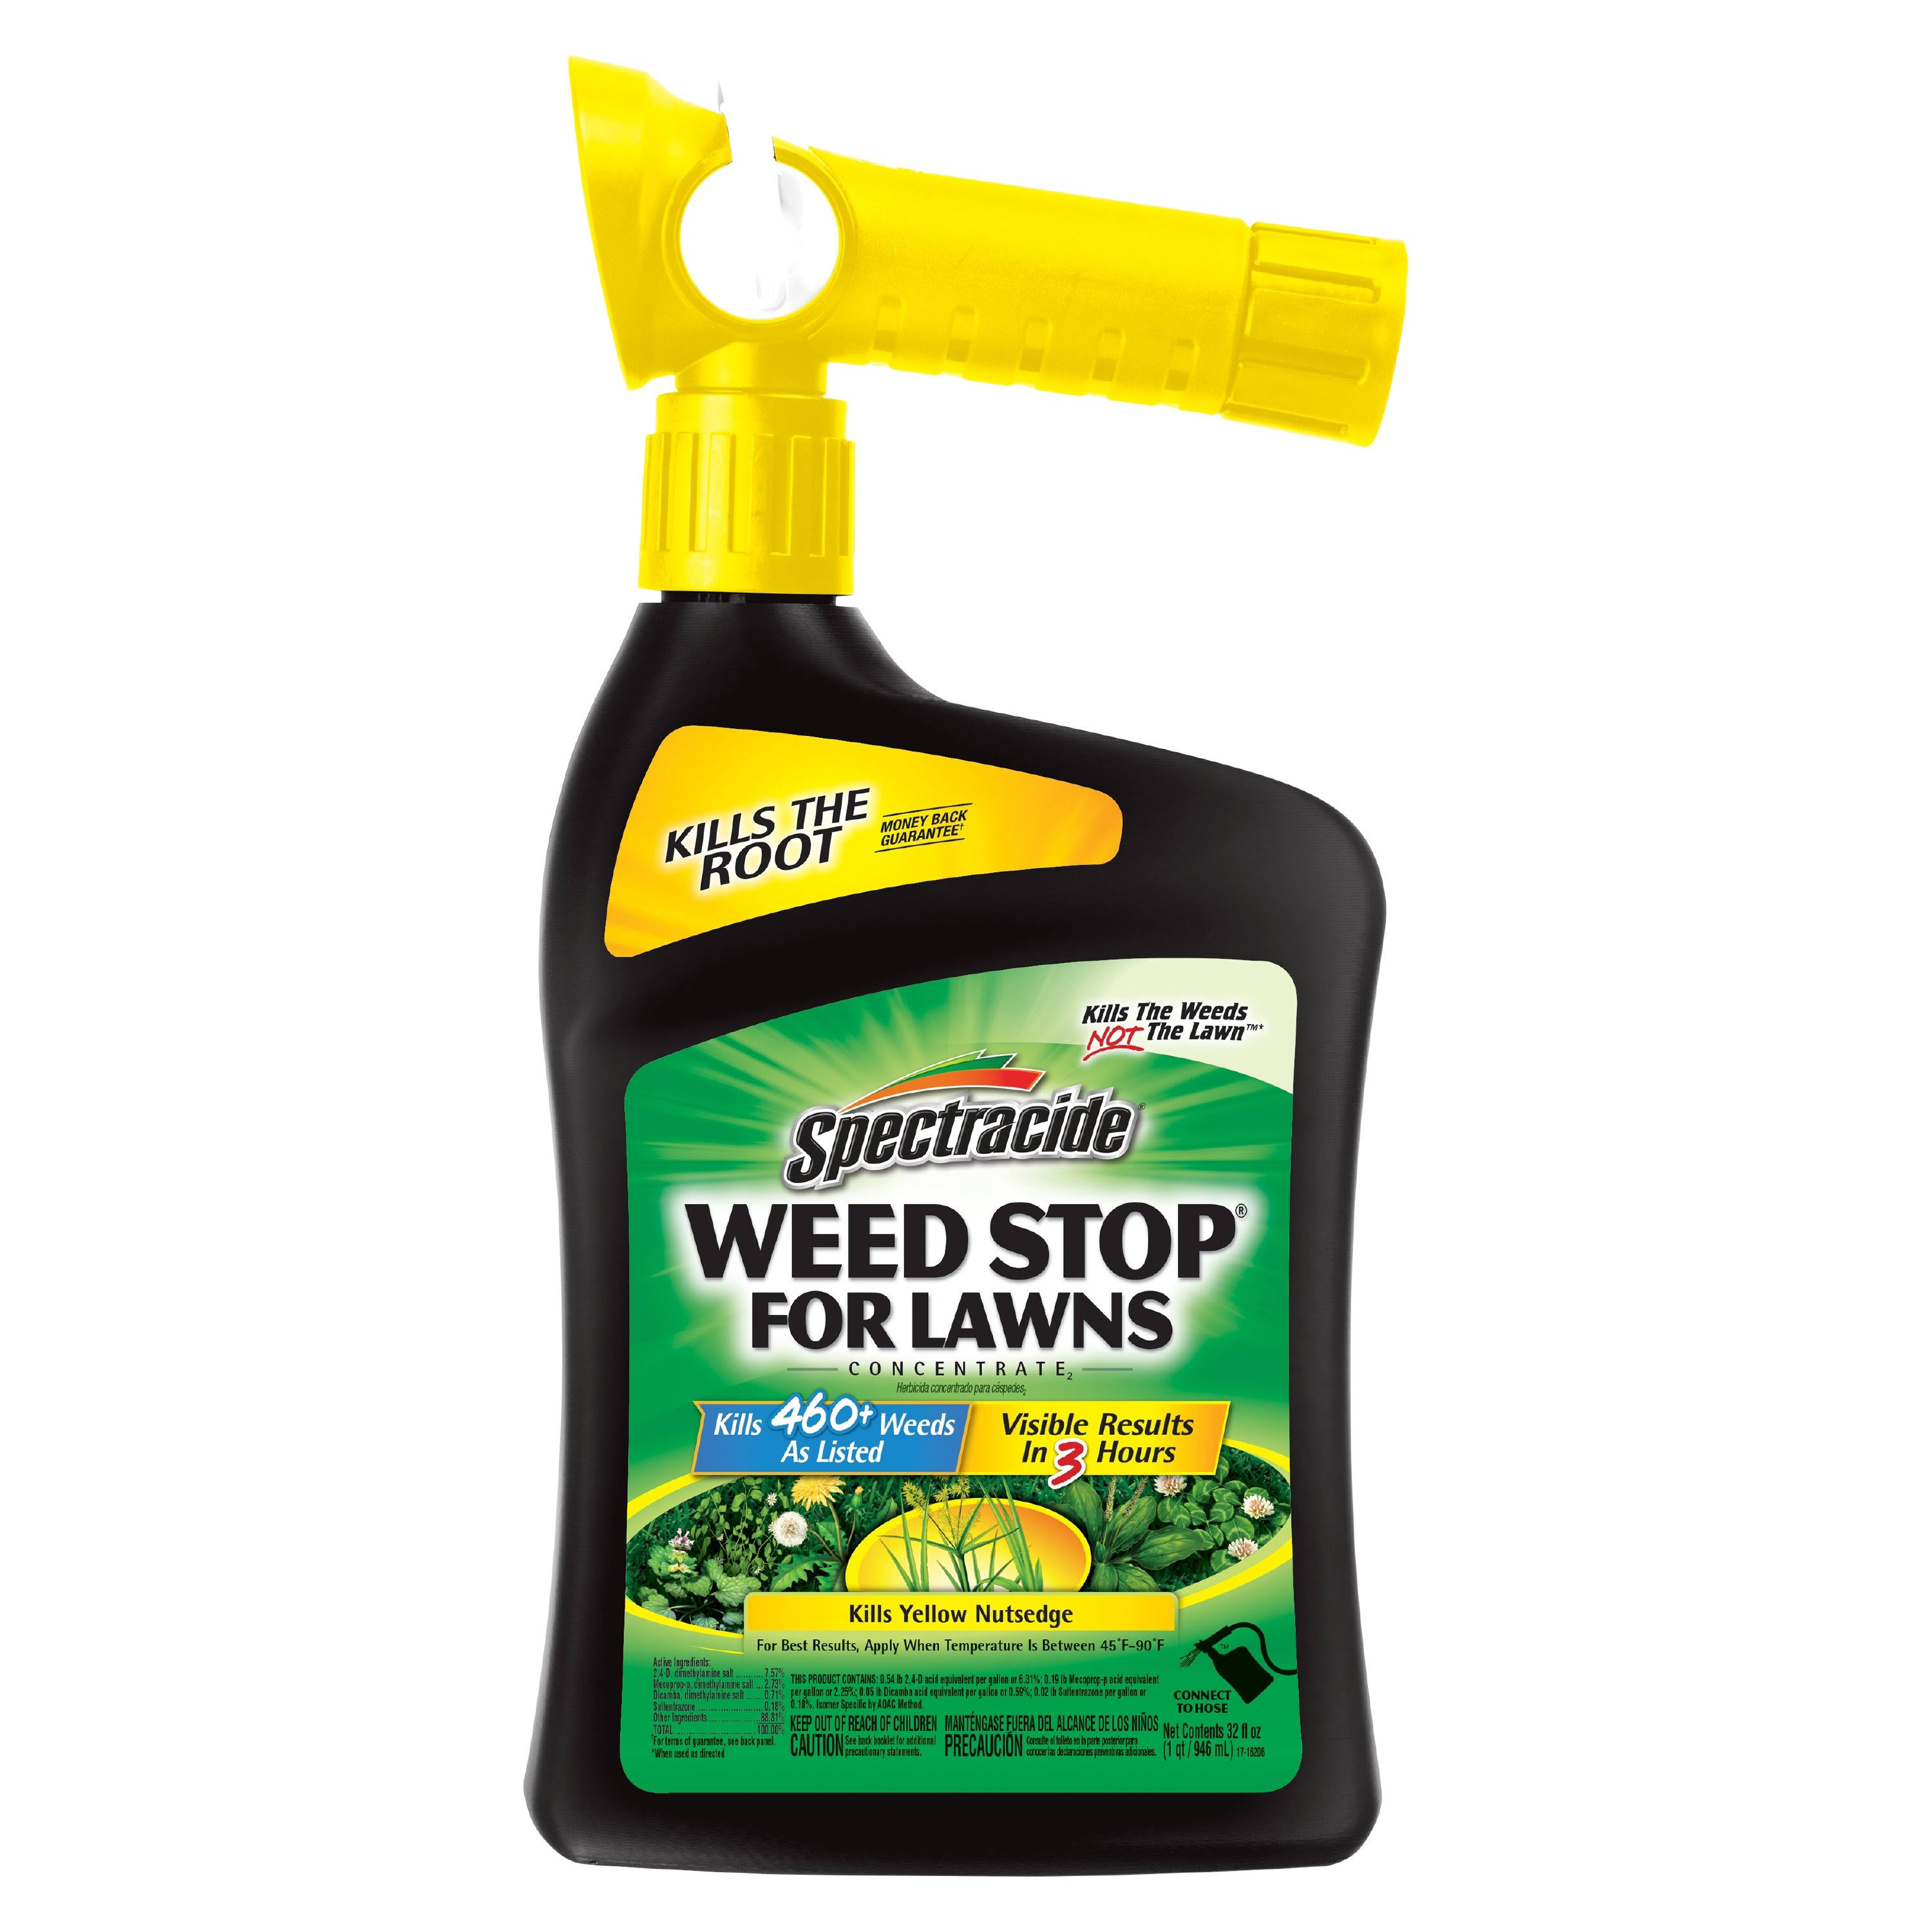 Spectracide Weed Stop Concentrate Selective Weed Killer - 32oz